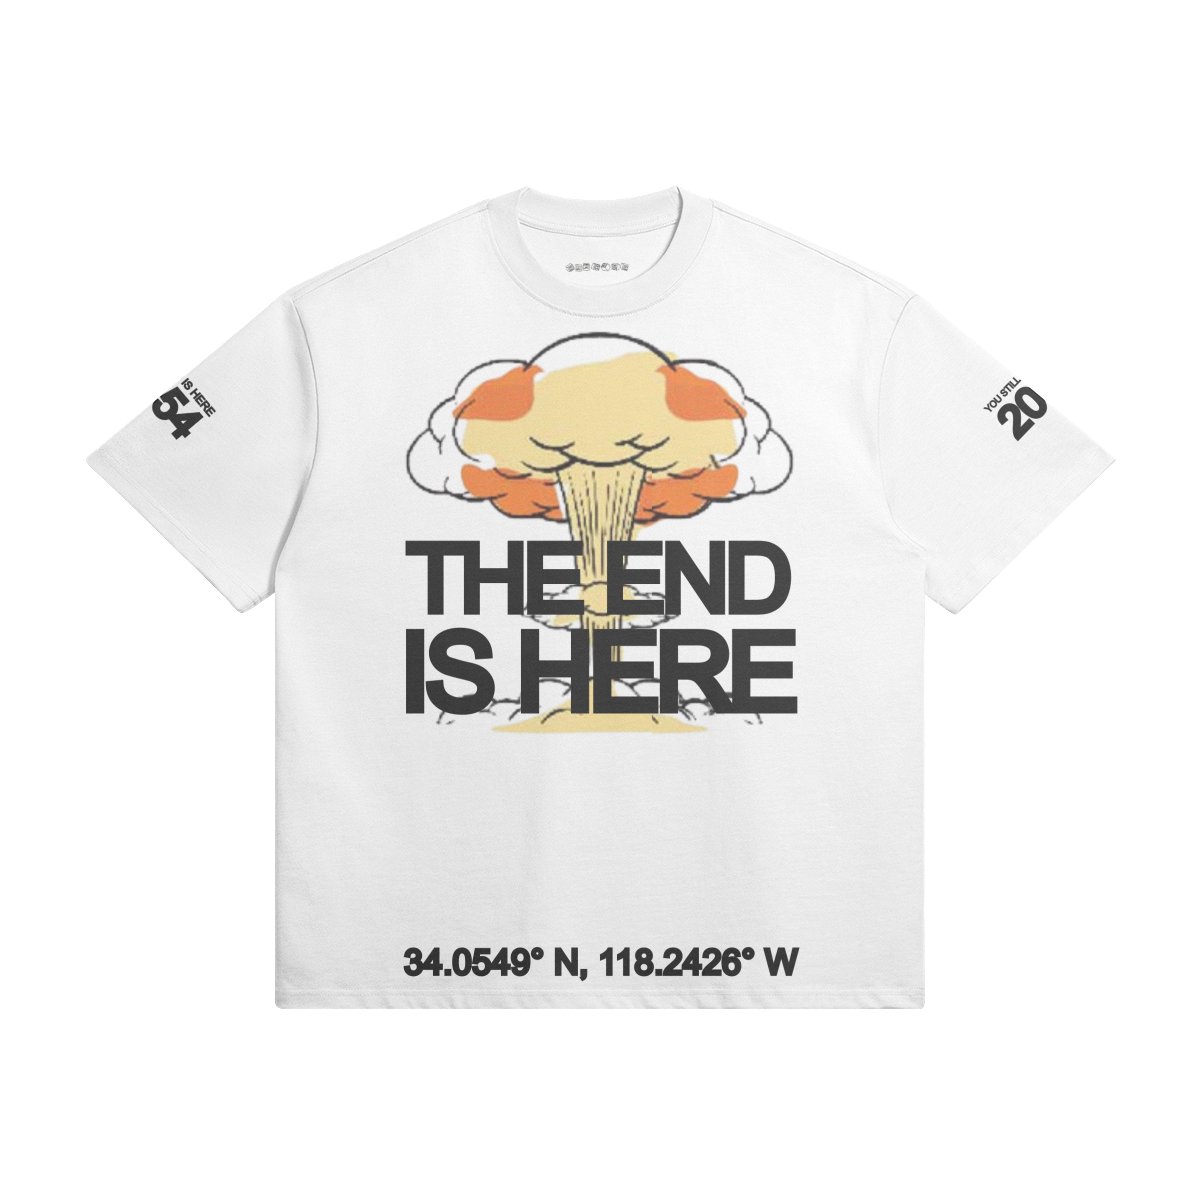 DAYCARE "THE END IS HERE" T-SHIRT